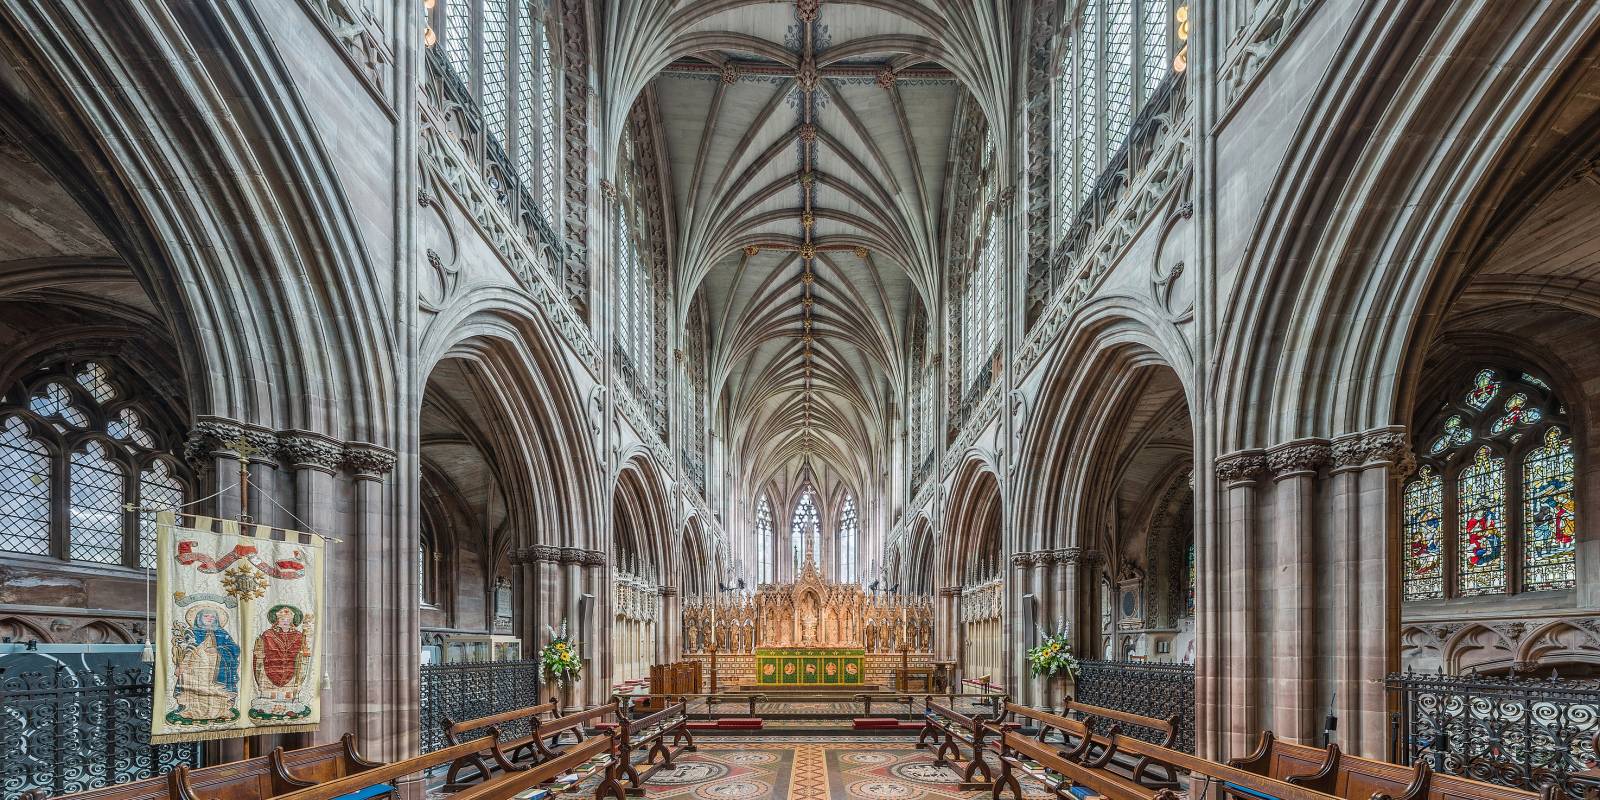 The high altar at Lichfield Cathedral